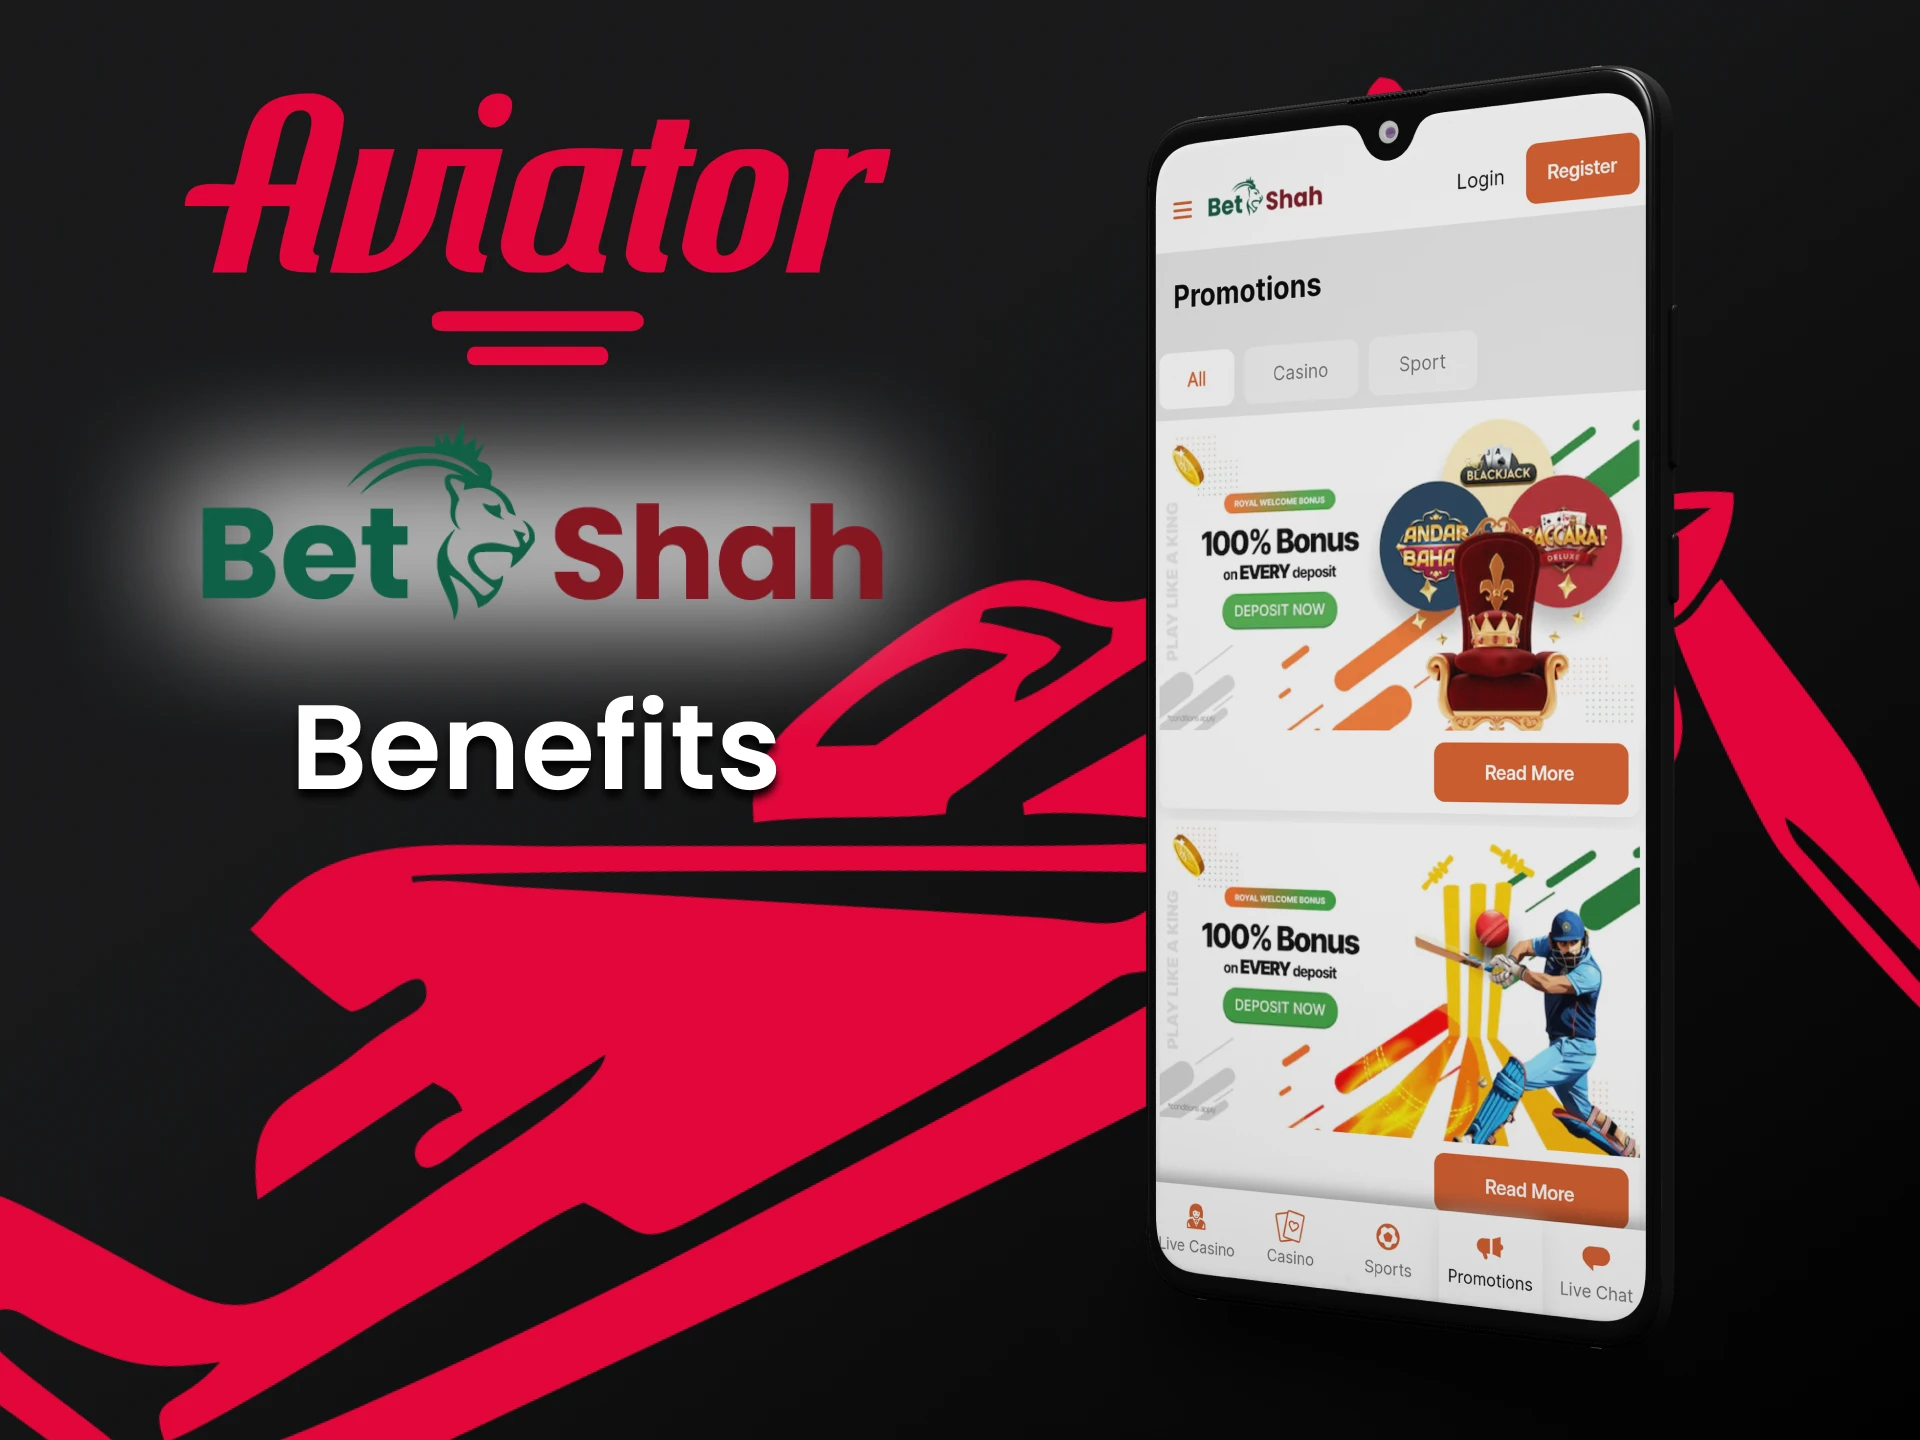 BetShah has many special offers for Aviator.